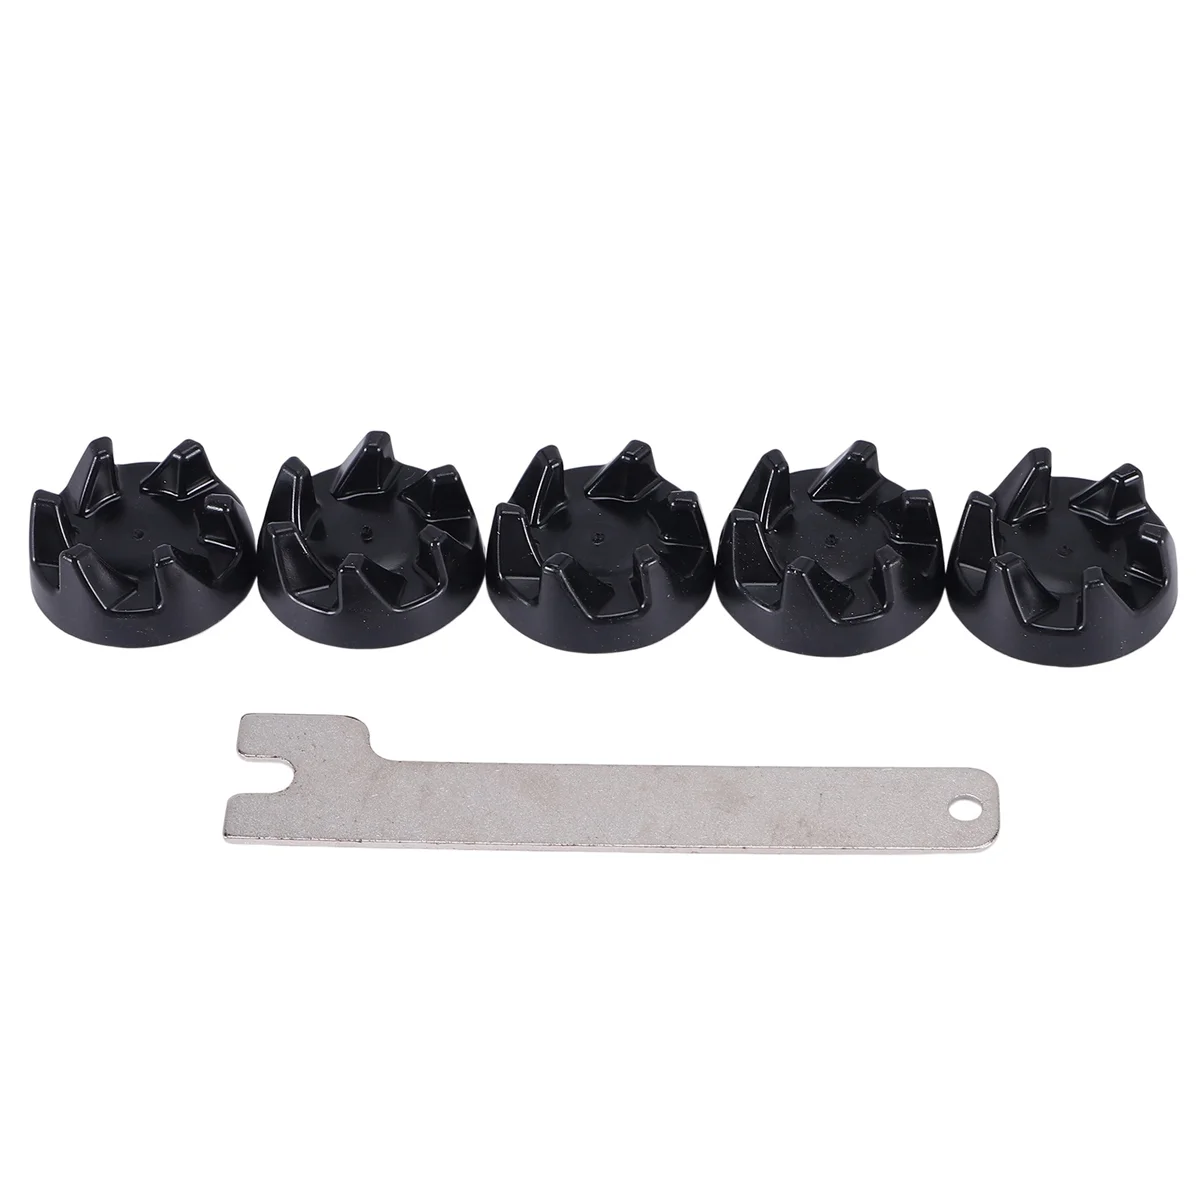 

6 Packs 9704230 Blender Coupler Blender Coupling Replacment Parts with 1 Wrench Compatible for Kitchen Aid WP9704230VP WP9704230